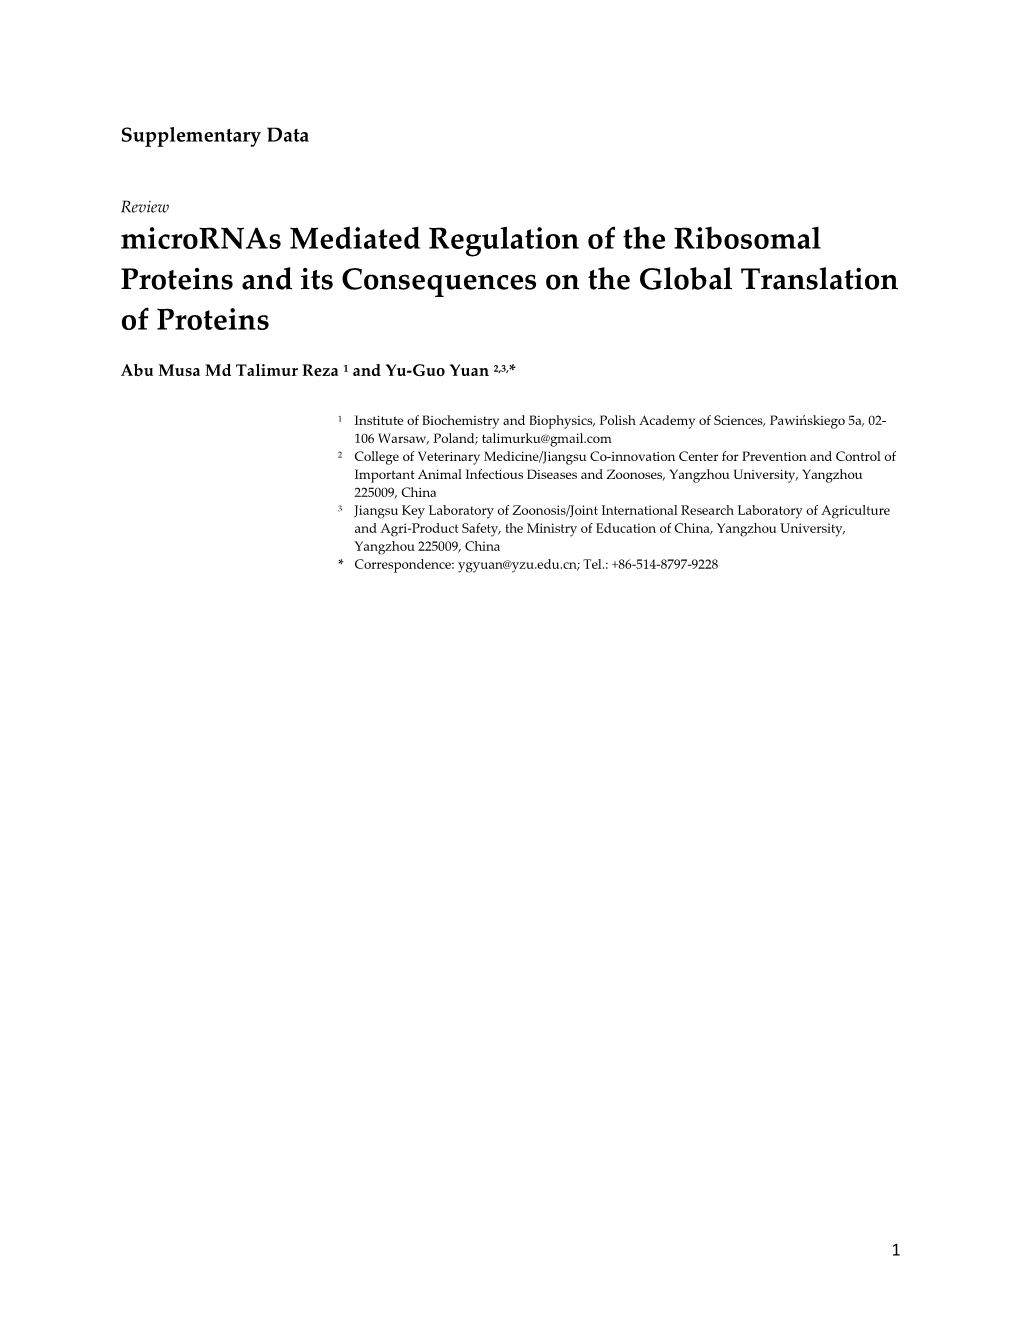 Micrornas Mediated Regulation of the Ribosomal Proteins and Its Consequences on the Global Translation of Proteins